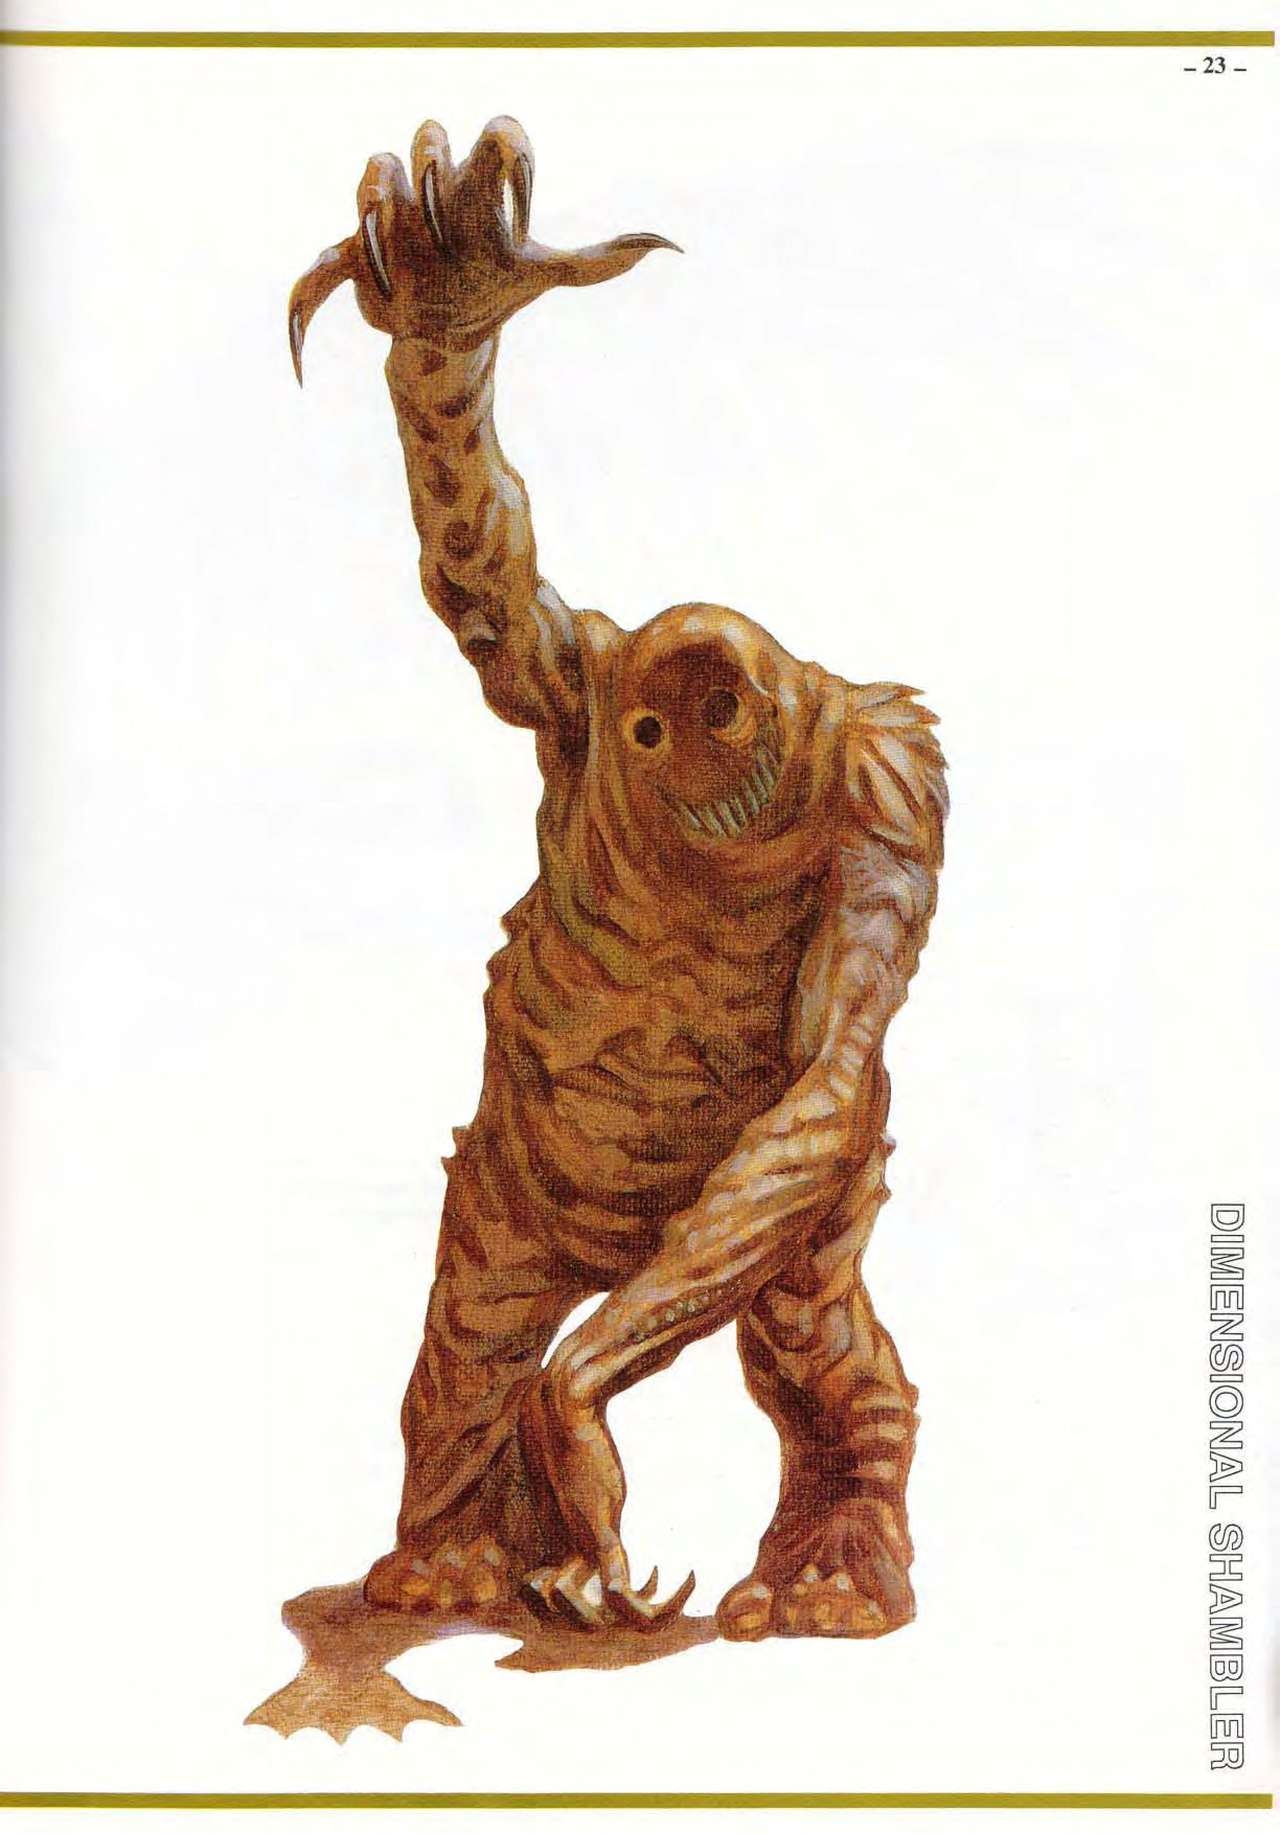 S. Petersen's Field Guide to Cthulhu Monsters 22